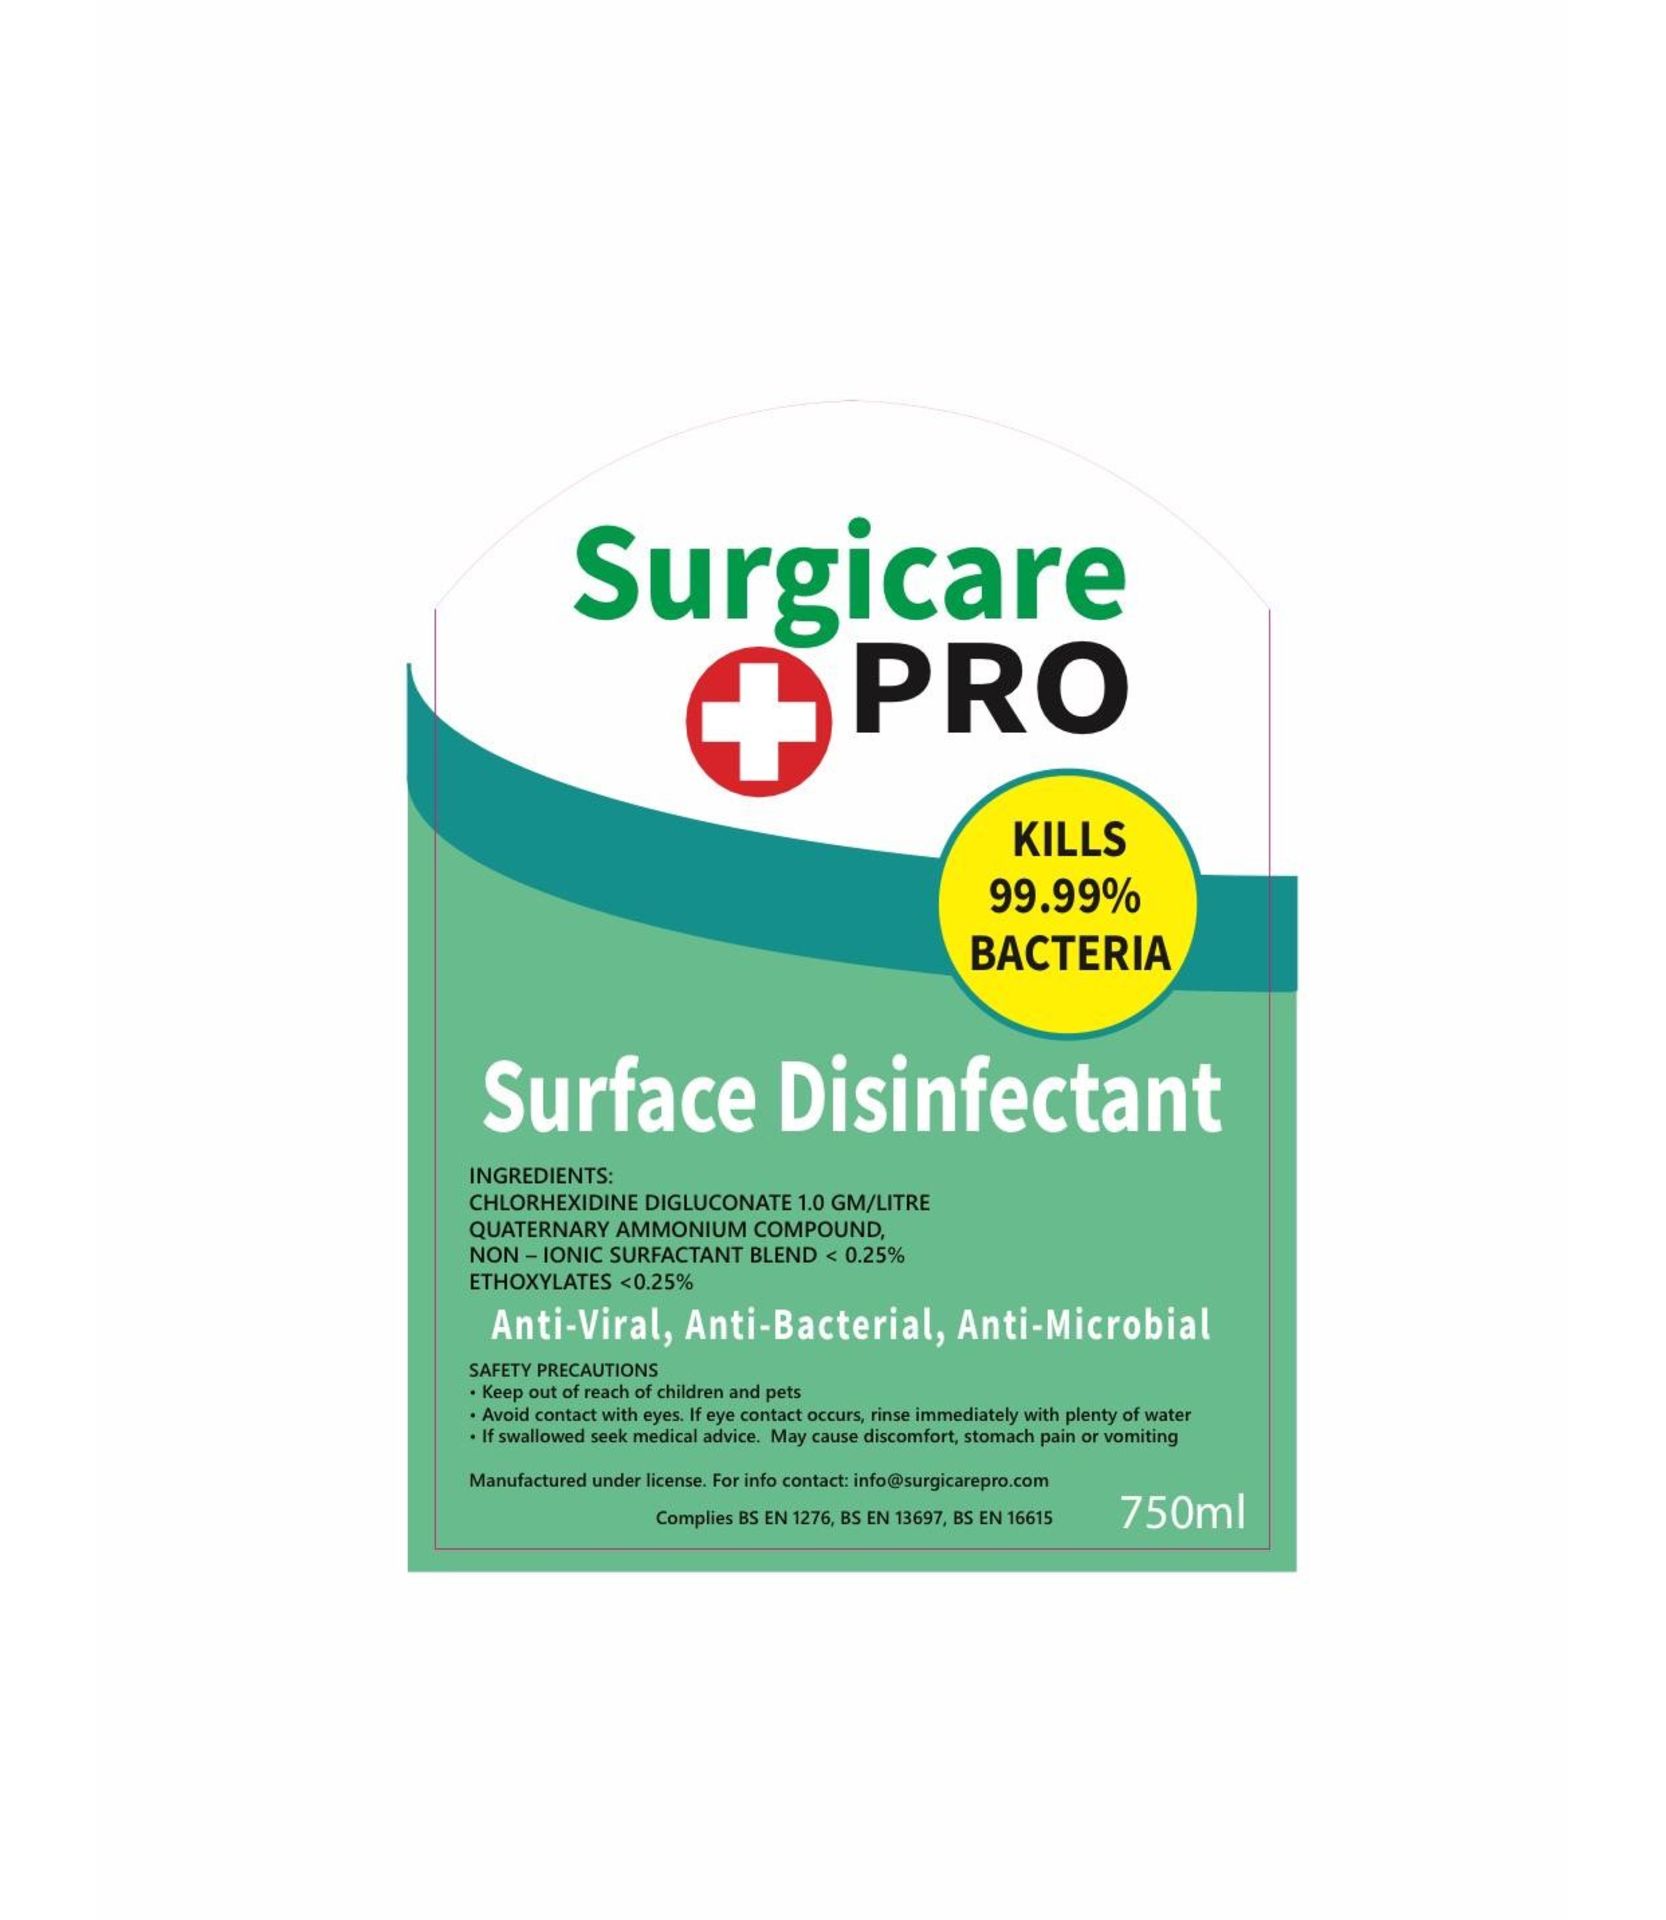 10 Boxes. Each Box Contains 10 Surgicare Pro Surface Disinfectant Spray - Image 2 of 3